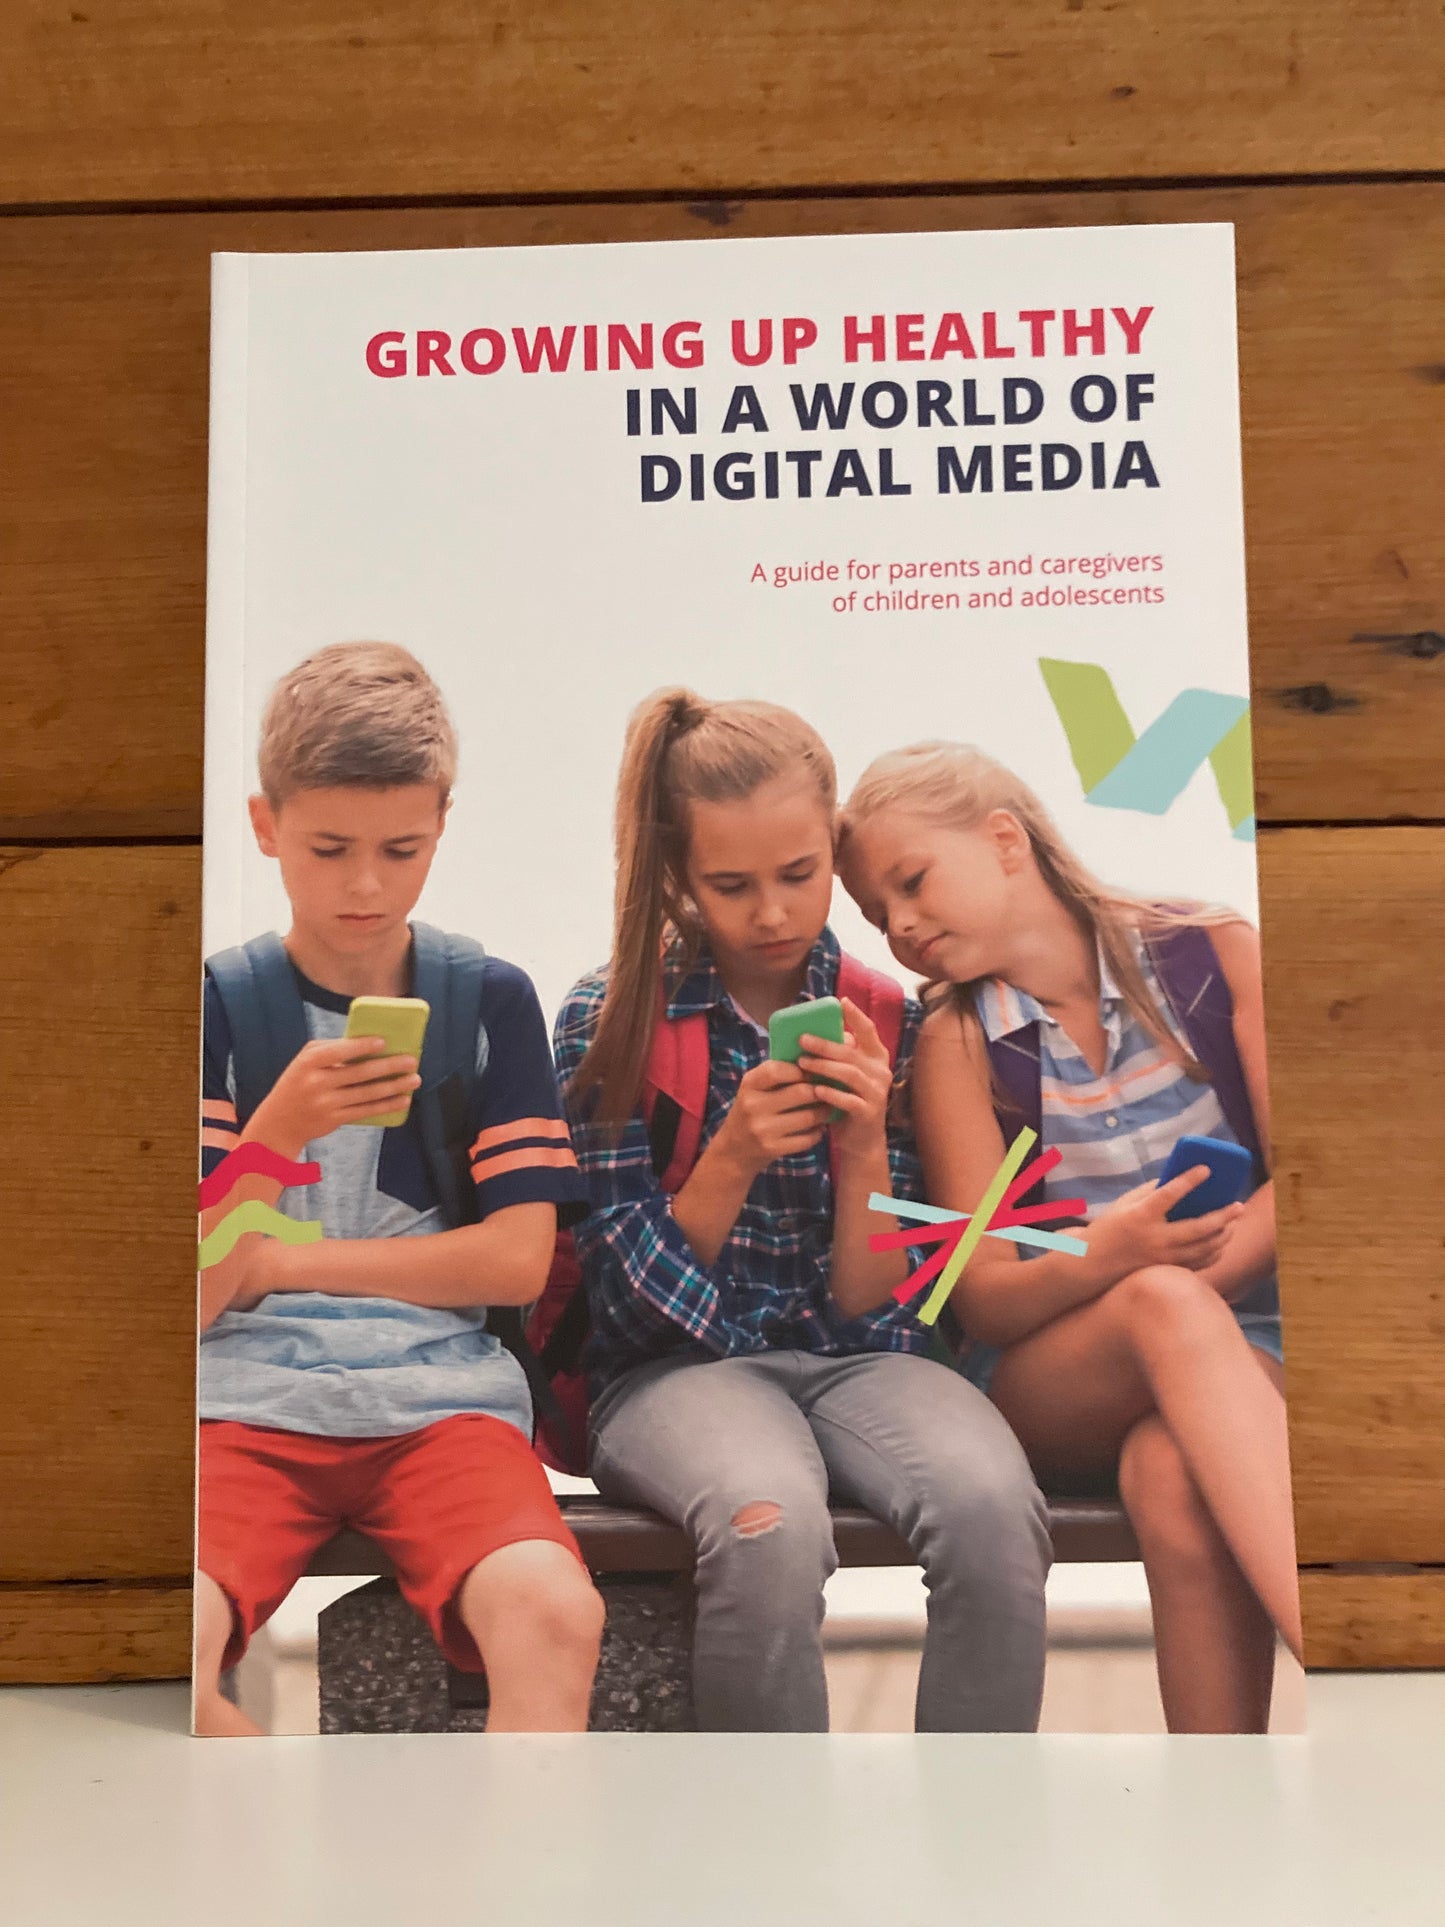 Parenting Resource Book - GROWING UP HEALTHY in a WORLD of DIGITAL MEDIA